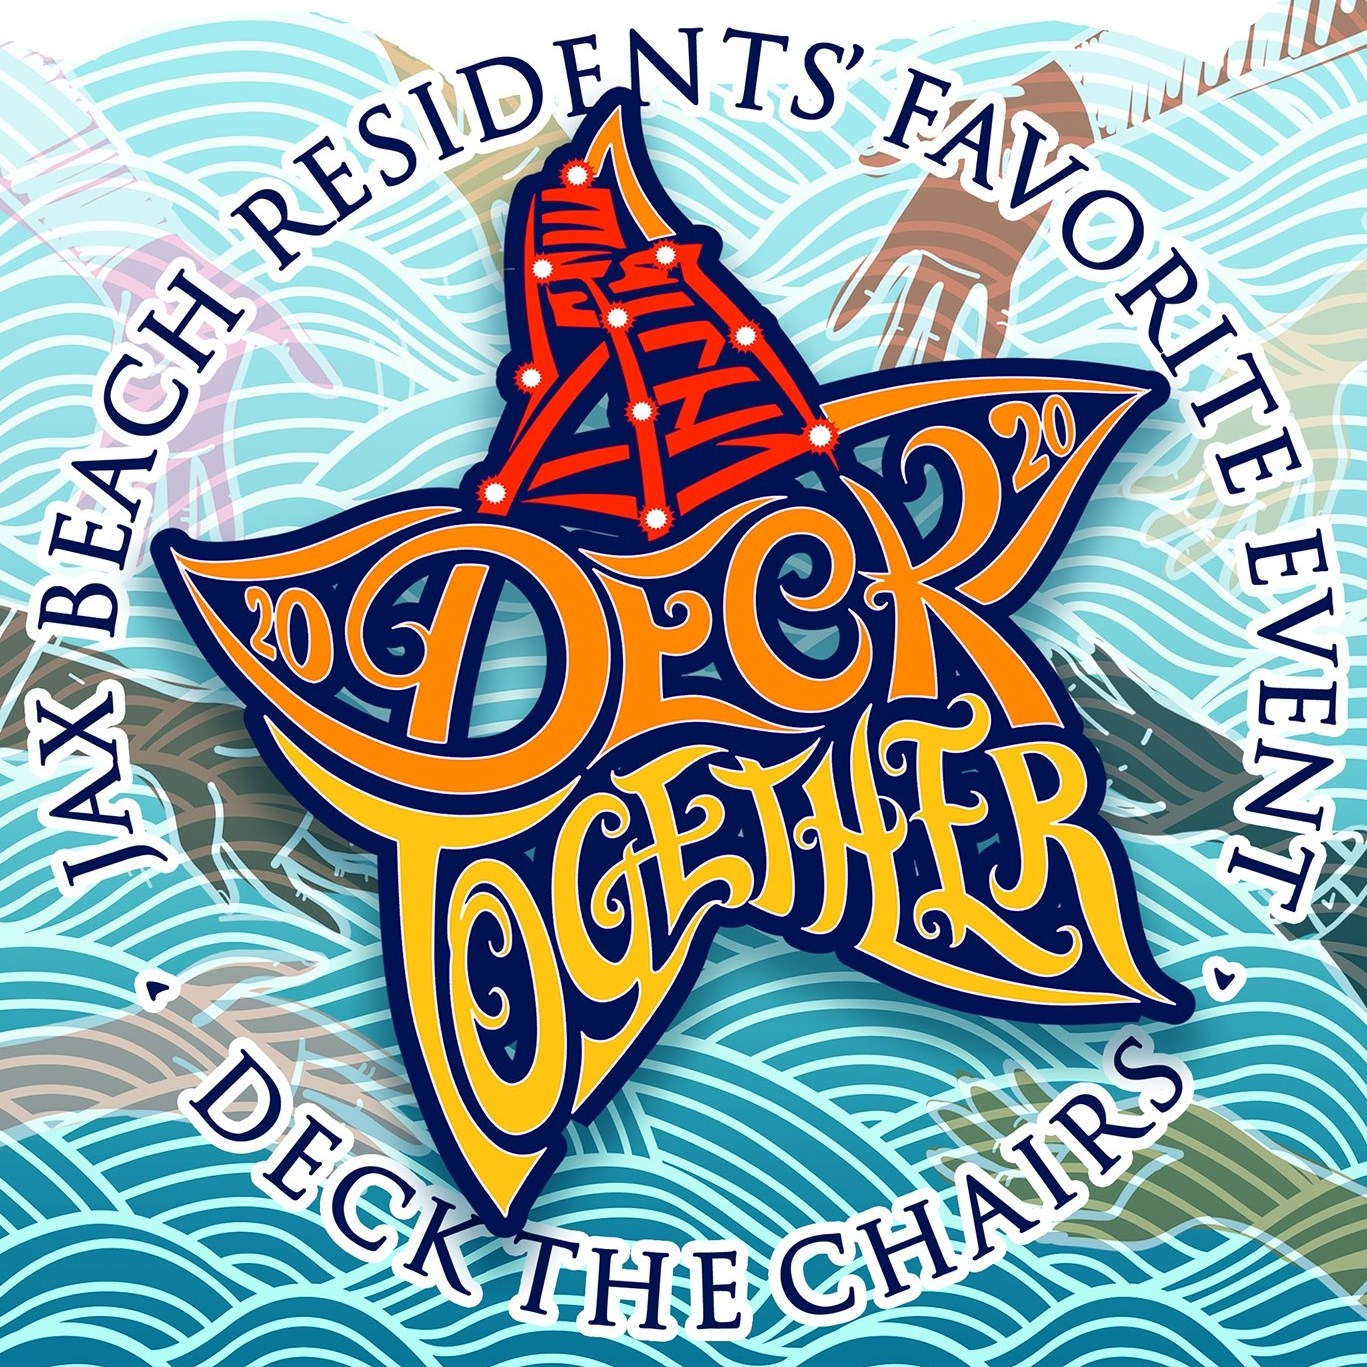 7801Jacksonville Beach – Deck the Chairs is back